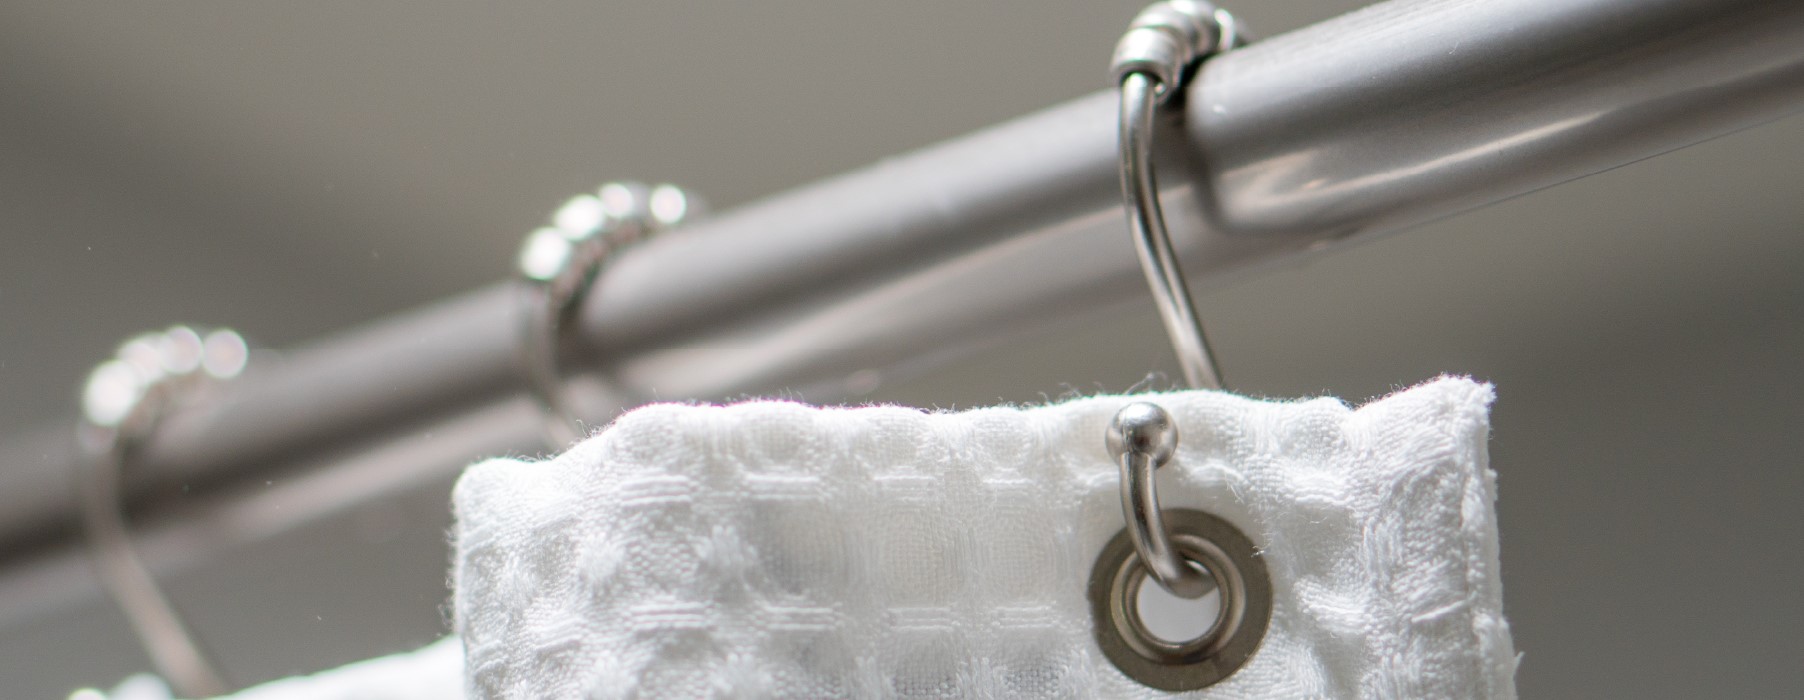 How To Lock A Shower Curtain Rod